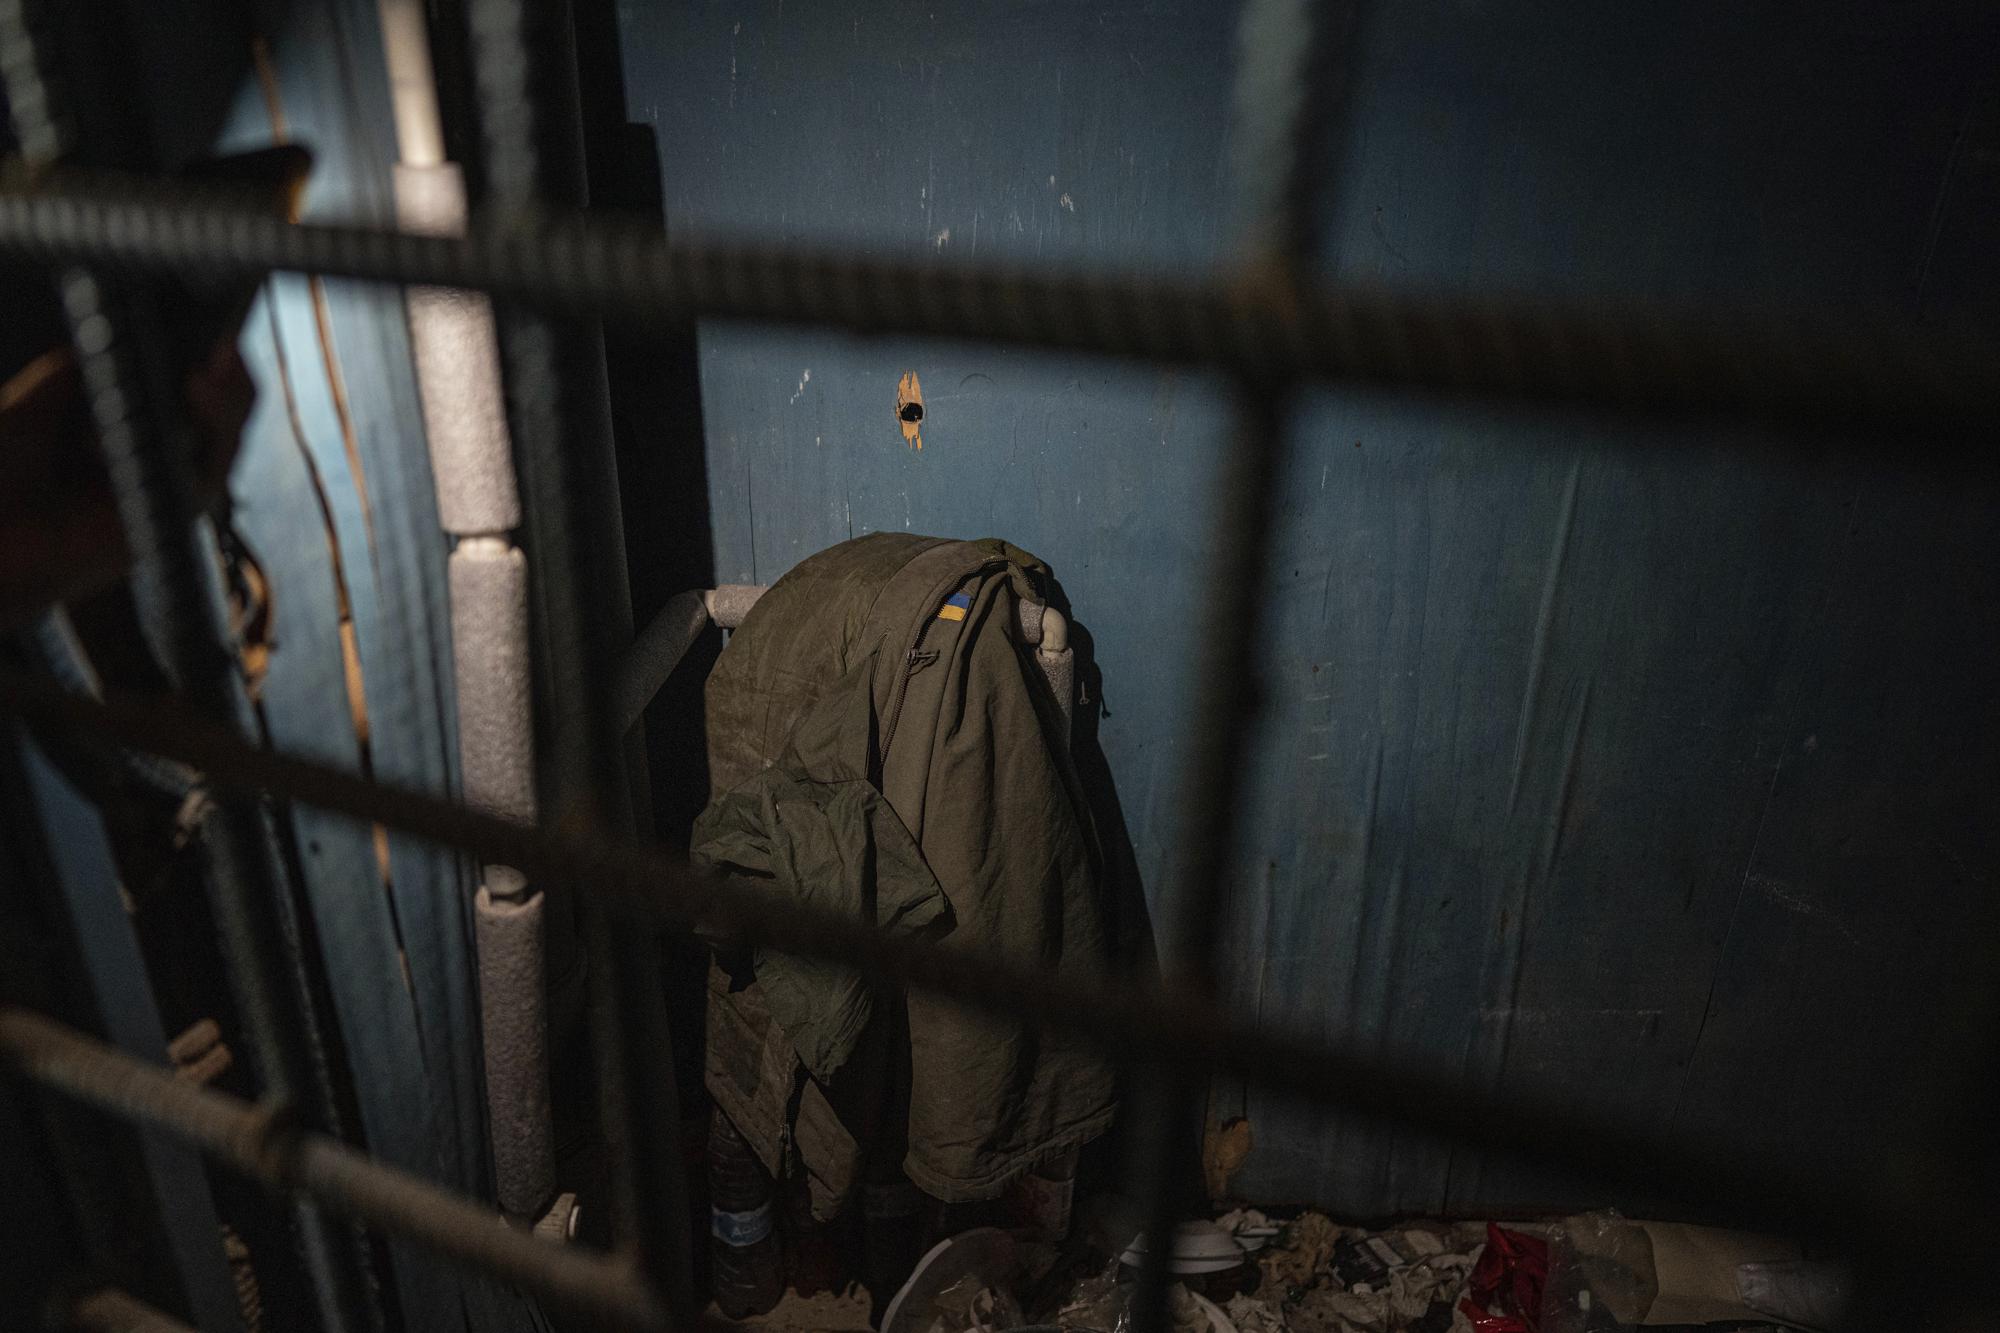 A Ukrainian soldier's jacket with a national flag is sits in a room at School No. 2 in the recently liberated town of Izium, Ukraine, Wednesday, Sept. 21, 2022. The school also served as a base and field hospital for Russian soldiers, and at least two Ukrainian civilians held there died. (AP Photo/Evgeniy Maloletka)